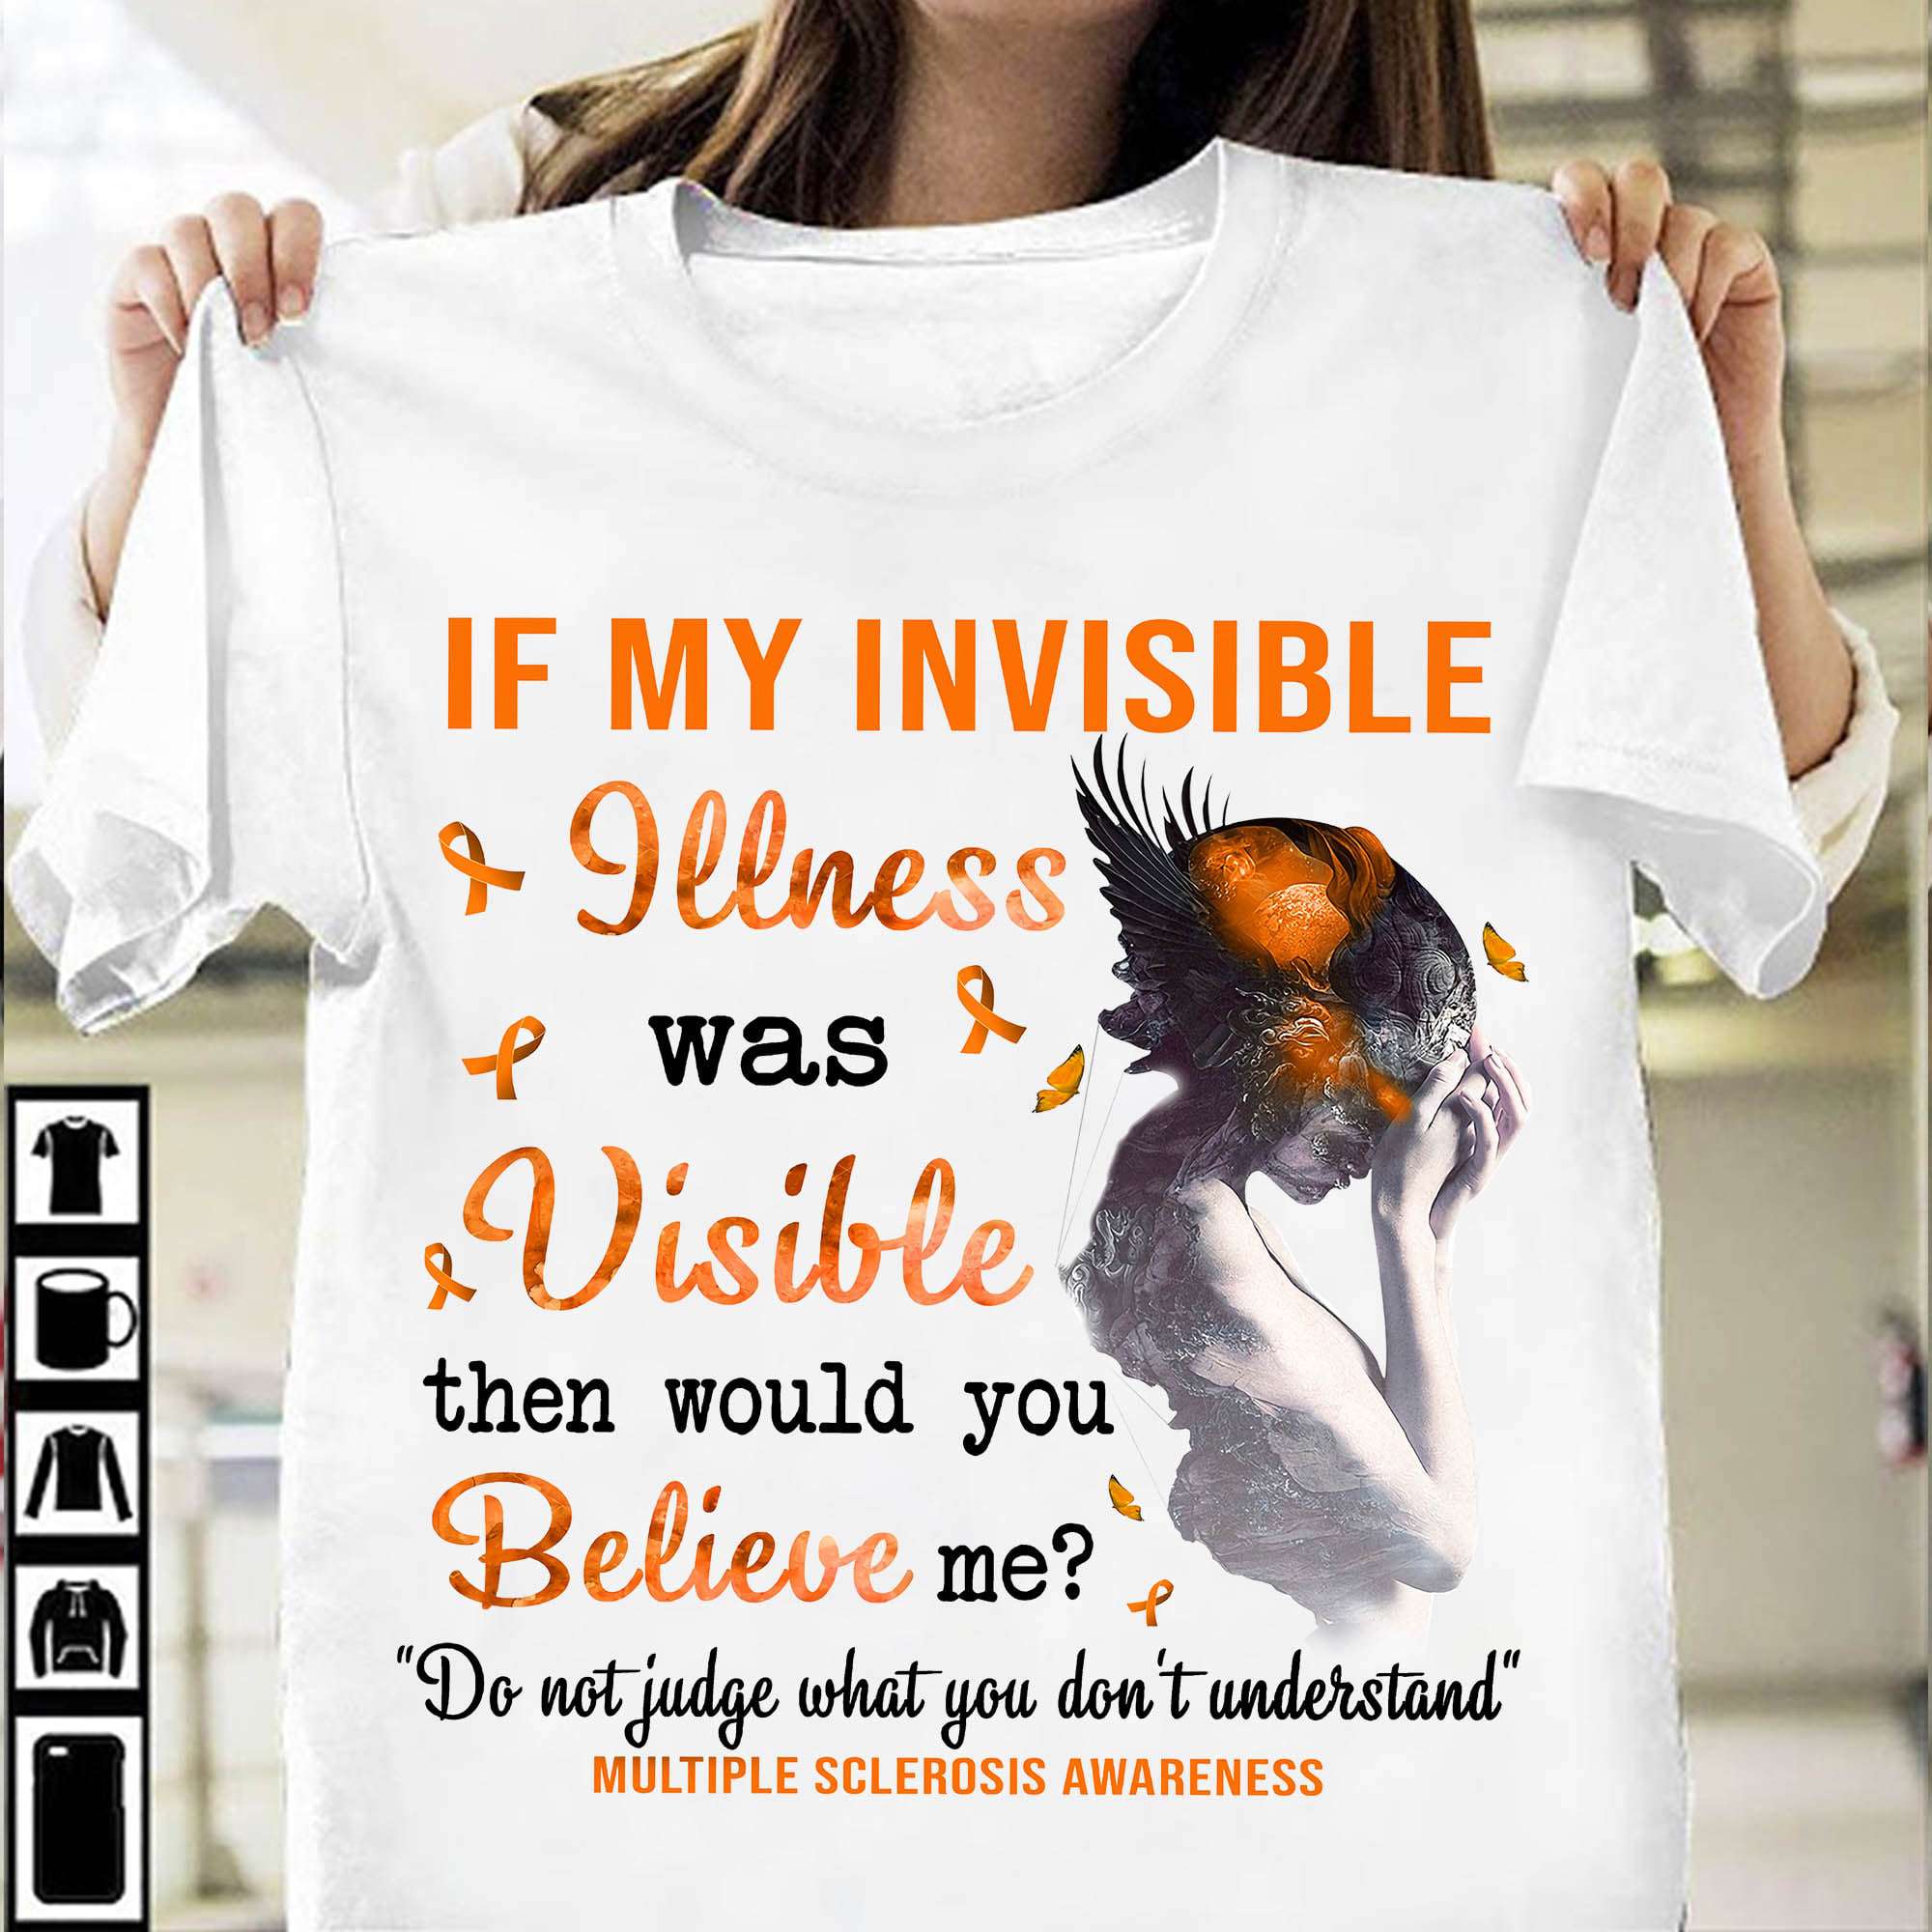 Multiple Sclerosis Woman - If im invisible illess was visible then would you believe me